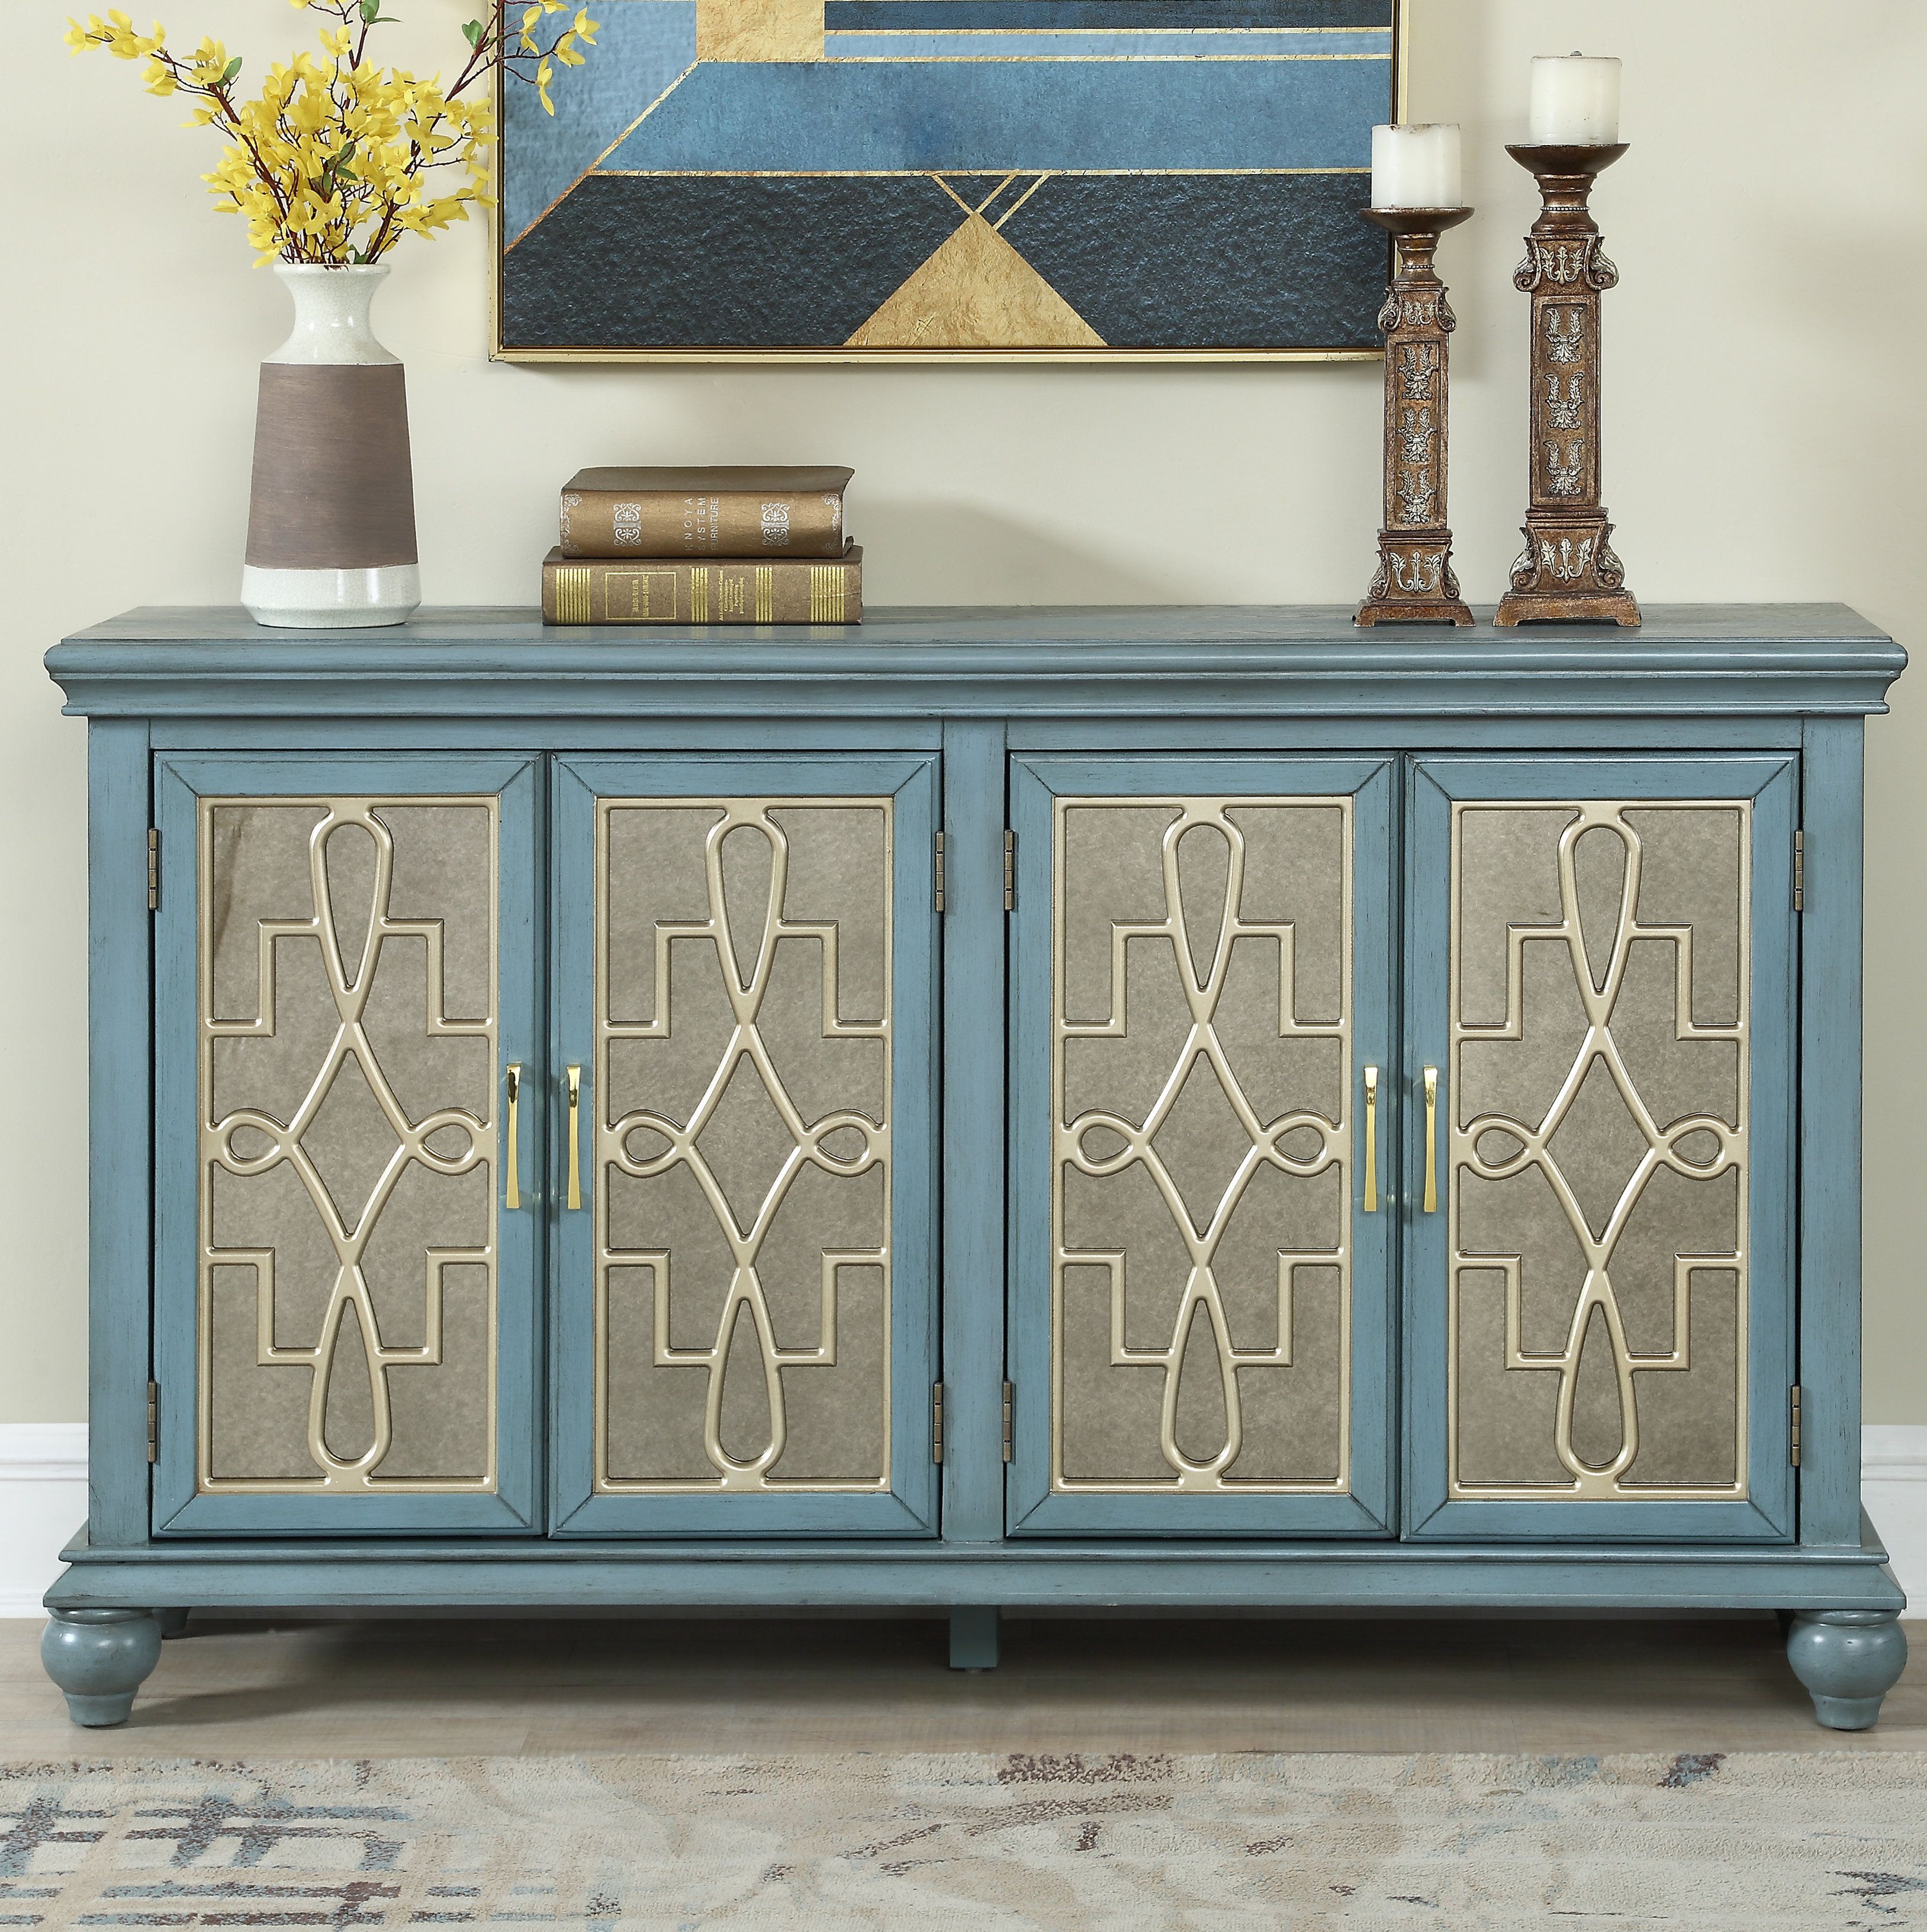 60 Inch Credenza | Wayfair In Current Caines Credenzas (View 13 of 20)